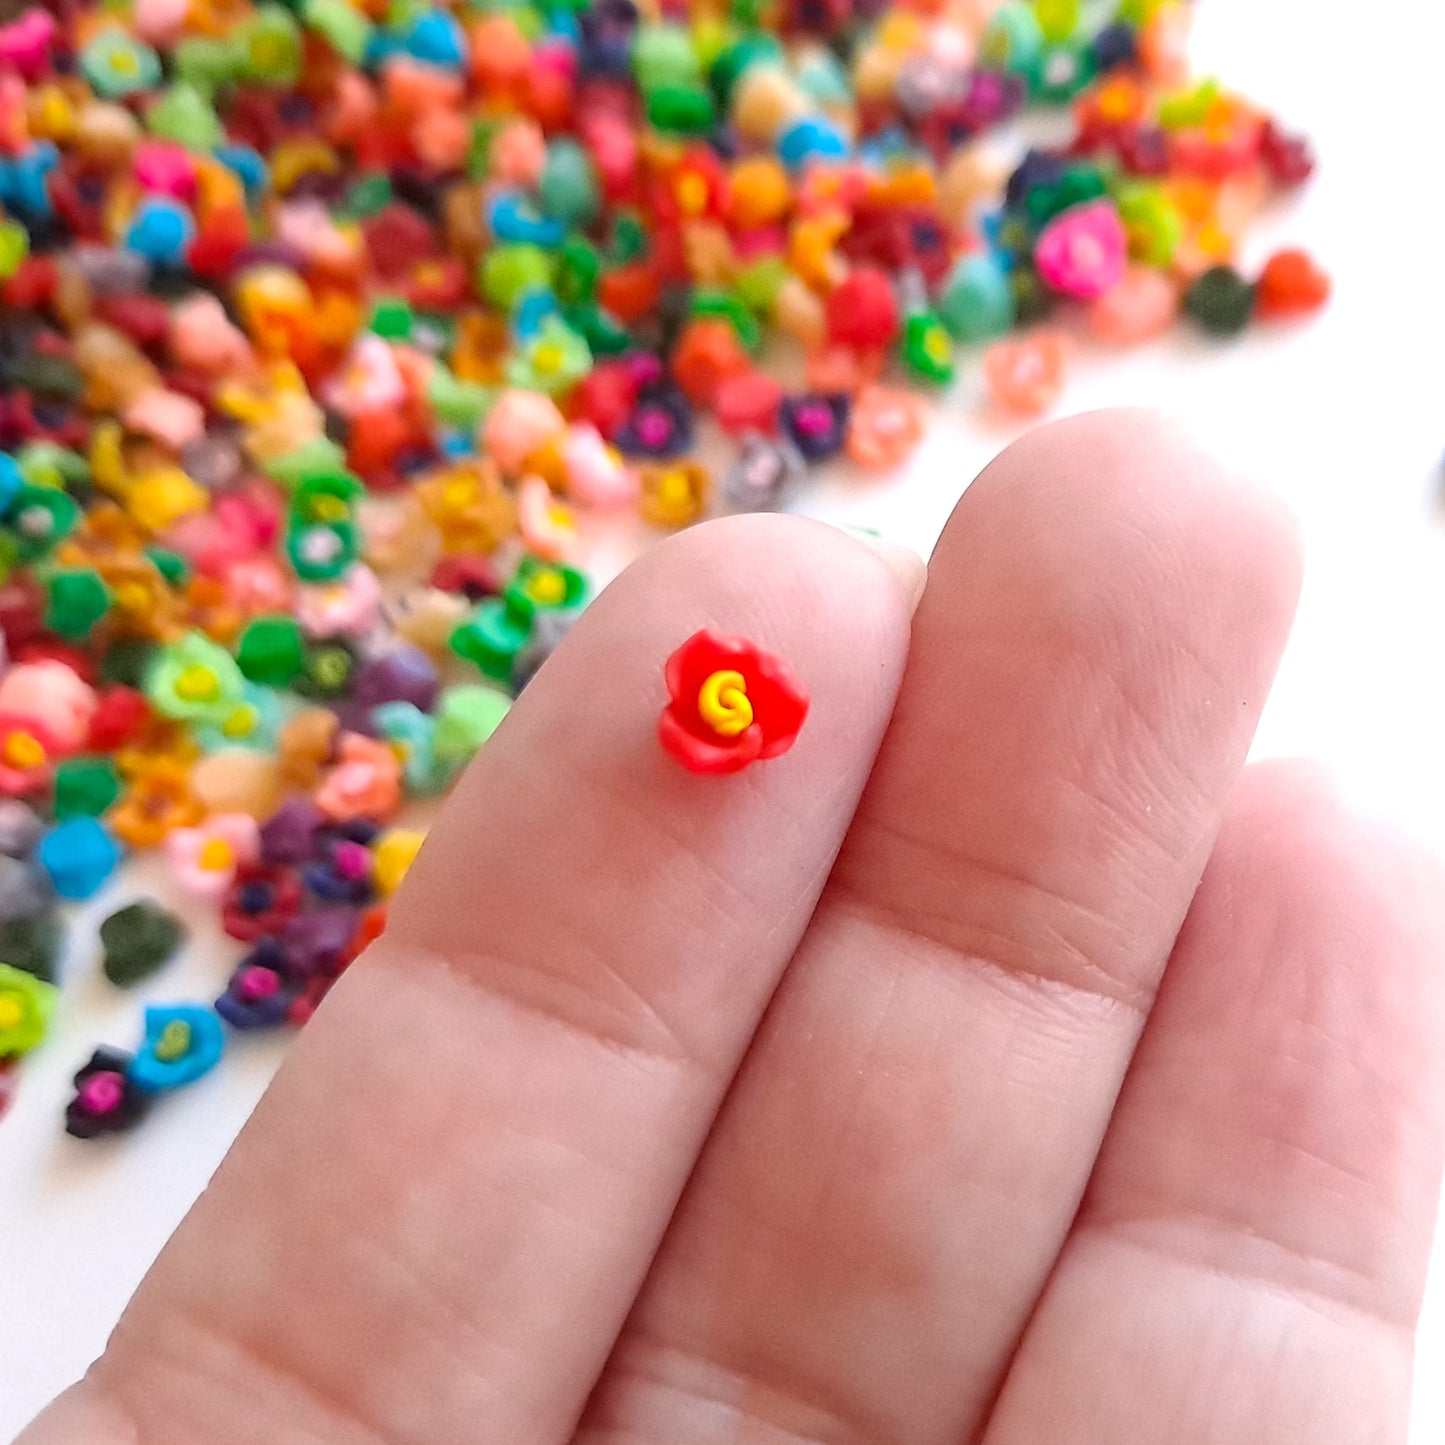 Tiny 5.5mm to 6mm Flower Cabochons, Colorful Autumn Mix Resin Flatbacks